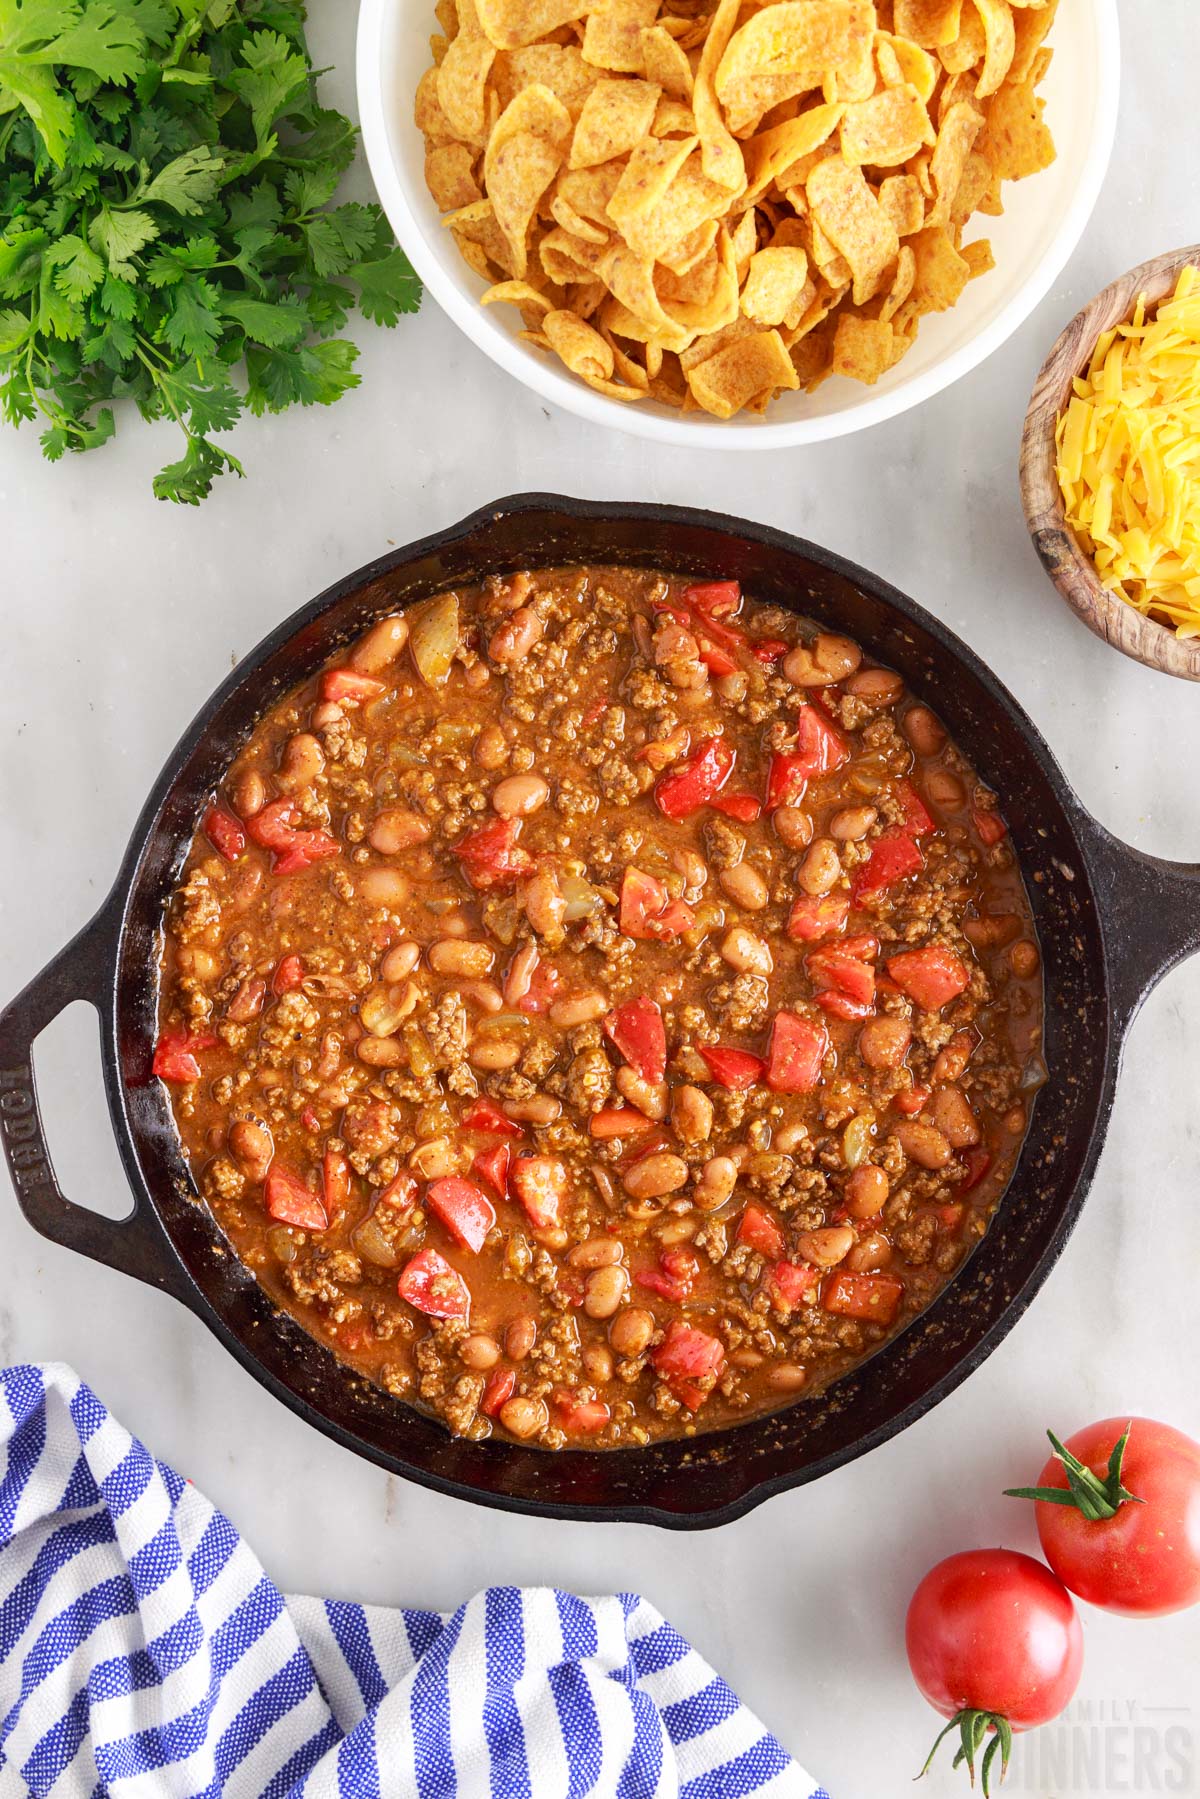 beans and tomatoes added to beef mixture in skillet